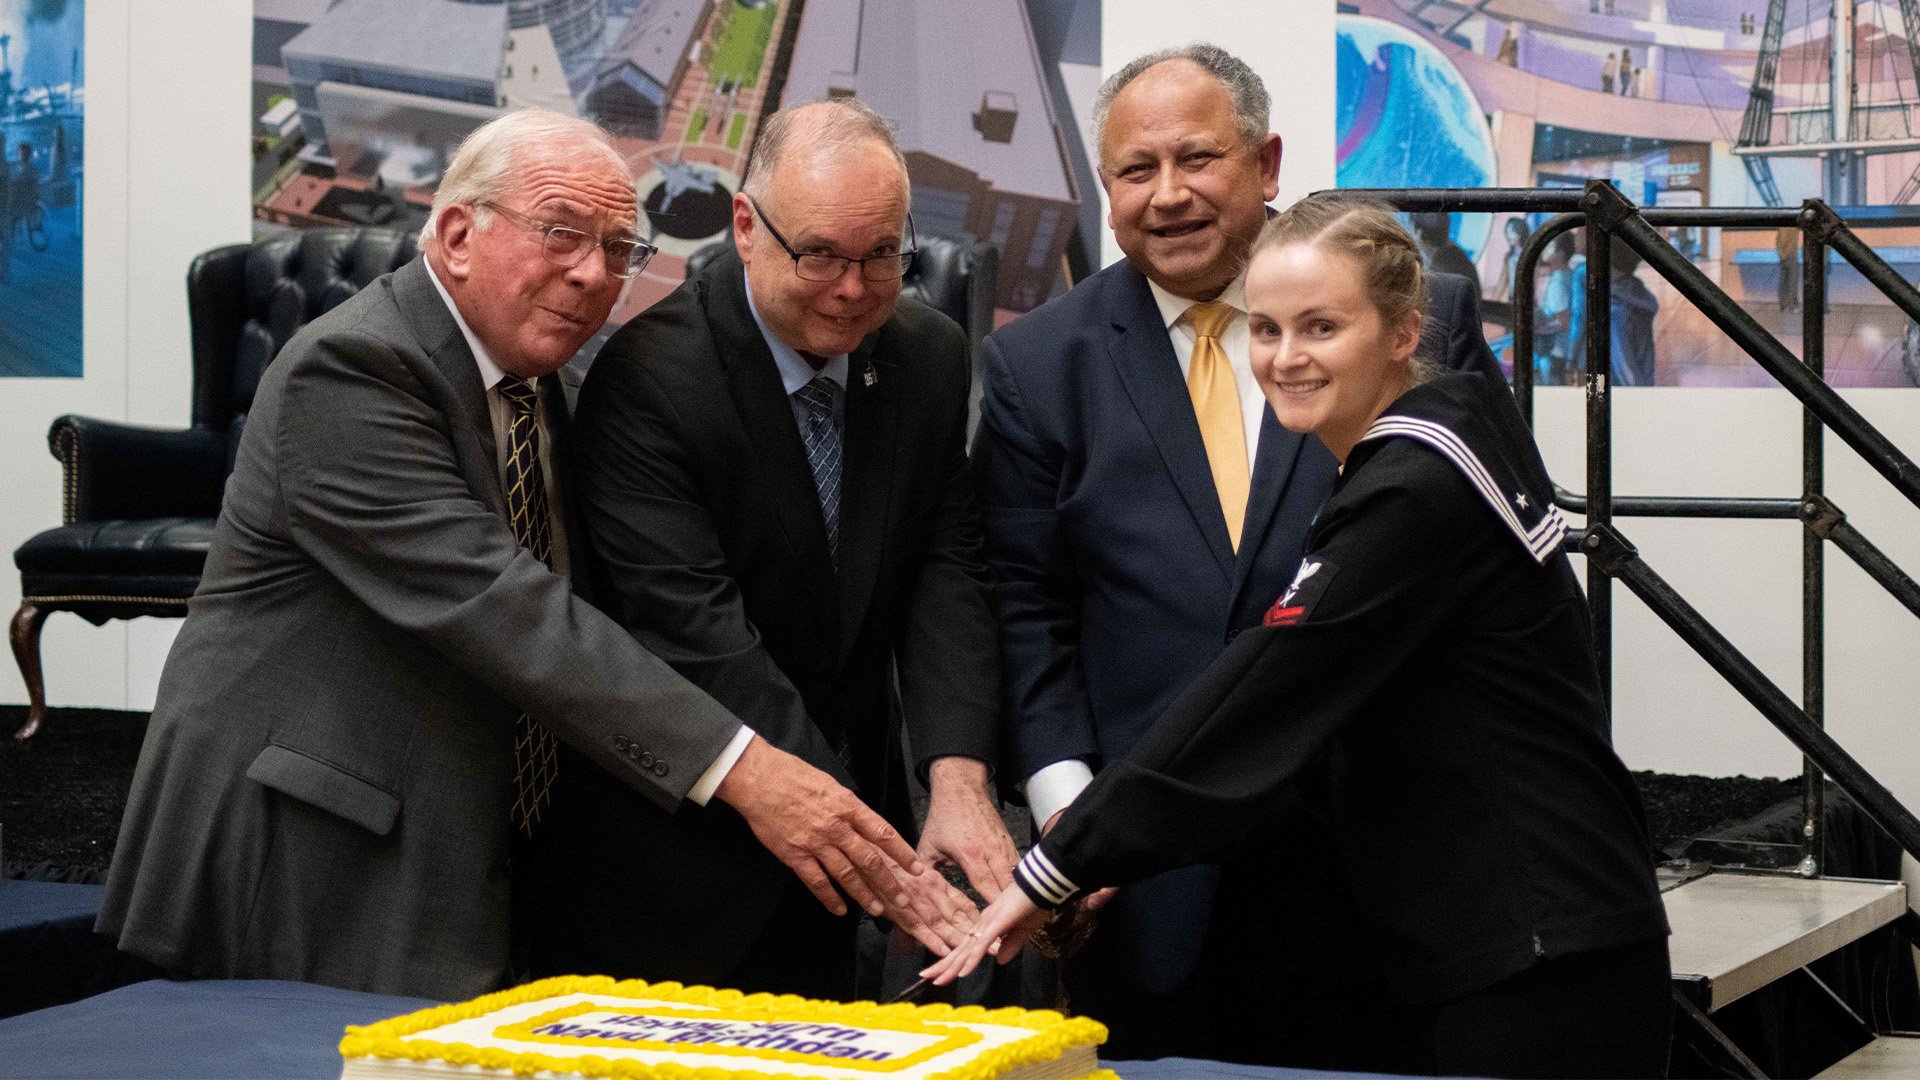 Navy Museum Development Foundation Board President Al Konetzni, a retired three-star admiral, US Naval History and Heritage Command director Samuel J. Cox, a retired rear admiral, and Secretary of the Navy Carlos Del Toro join Yeoman 2nd Class Caroline Ficklin in cutting the Navy's birthday cake at the National Museum of the US Navy dduring an event celebrating the Navy’s 247th birthday. That facility is slated to be replaced by a new museum located just outside the Washington Navy Yard. US Navy photo by Mass Communication Specialist 1st Class Abigayle Lutz.